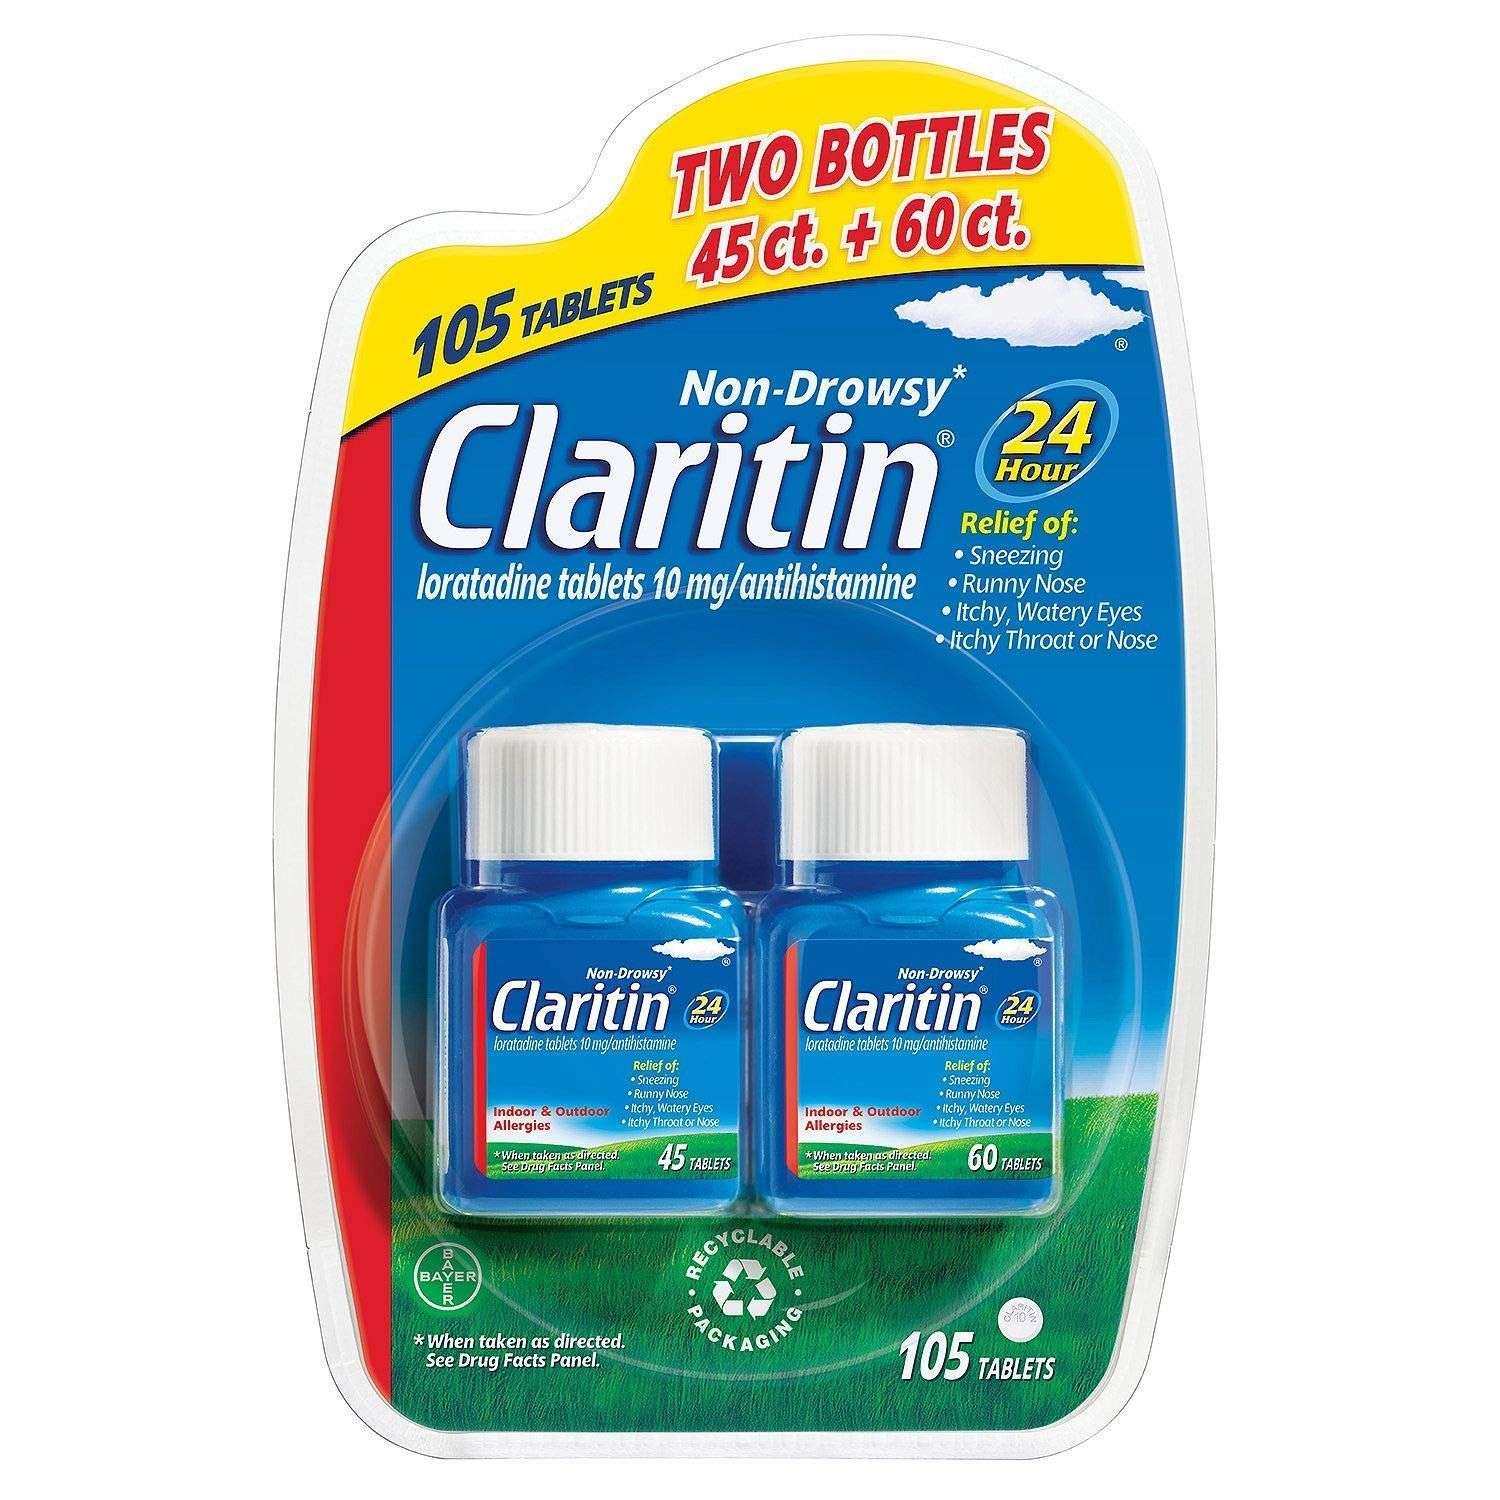 Claritin 24 Hour NonDrowsy Allergy Tablets 10 mgCgwe 105 ...